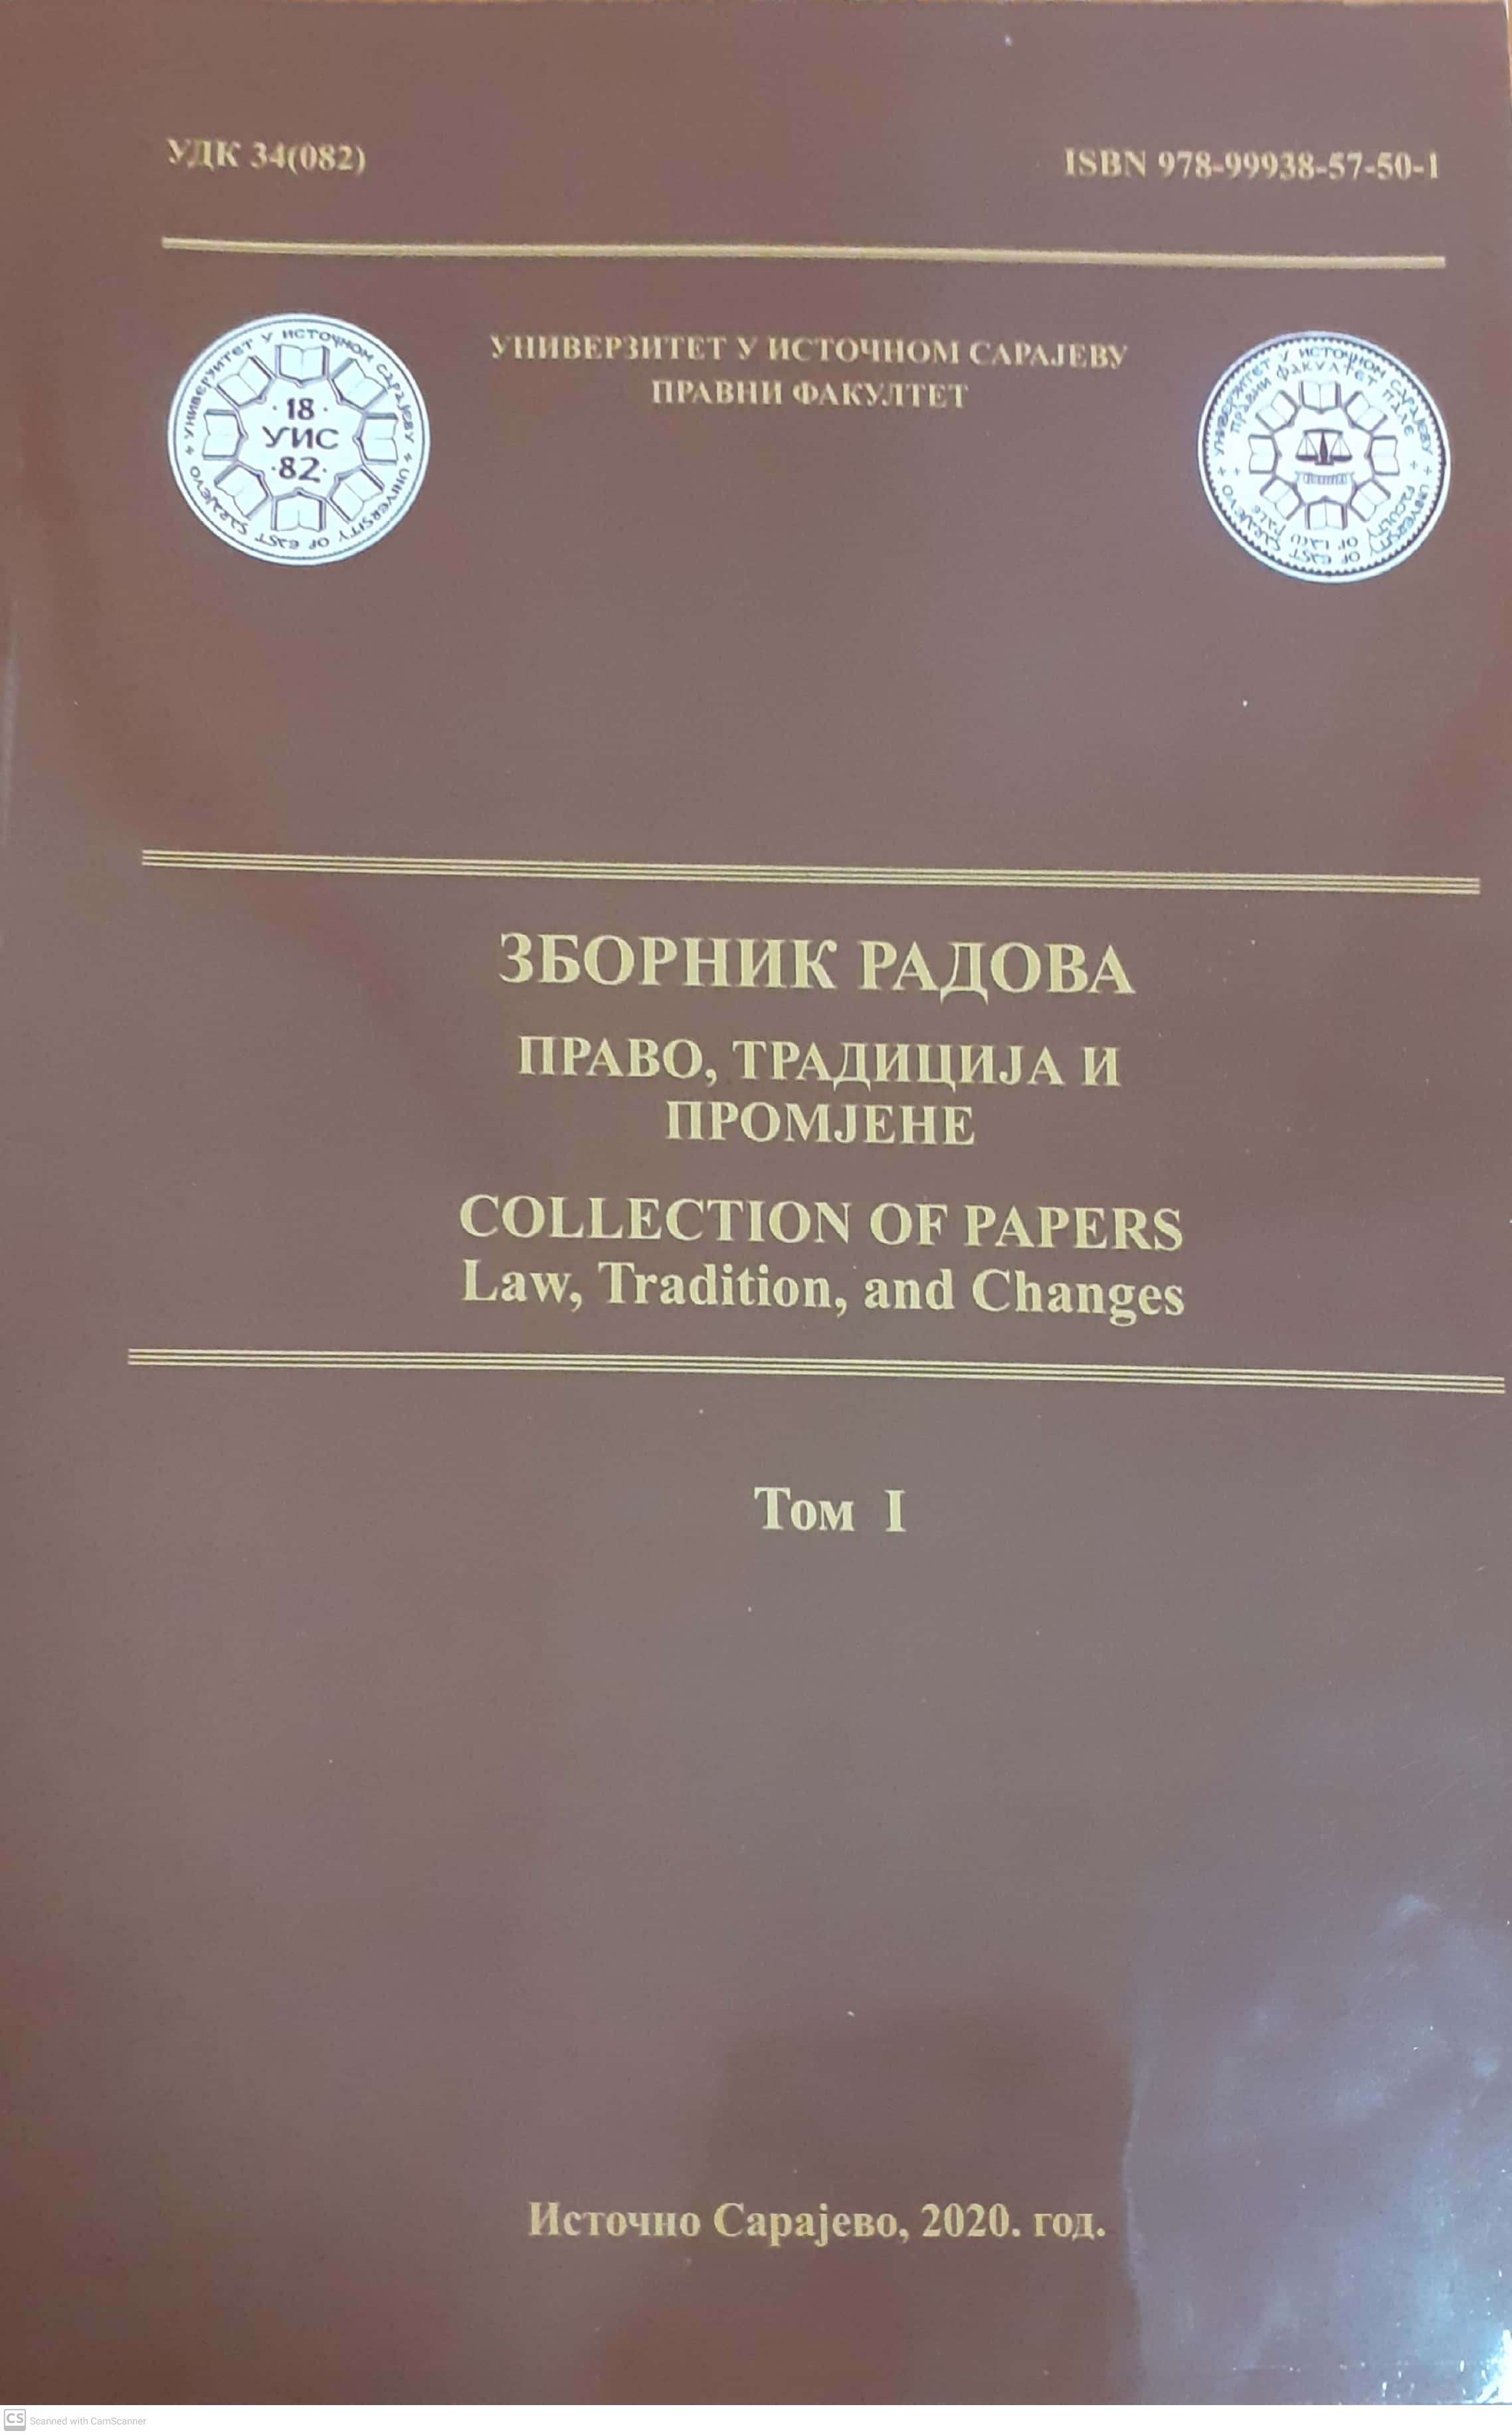 Collection of papers "Law, Tradition and Changes" Vol I - A scientific meeting (Belgrade, October 26, 2019)